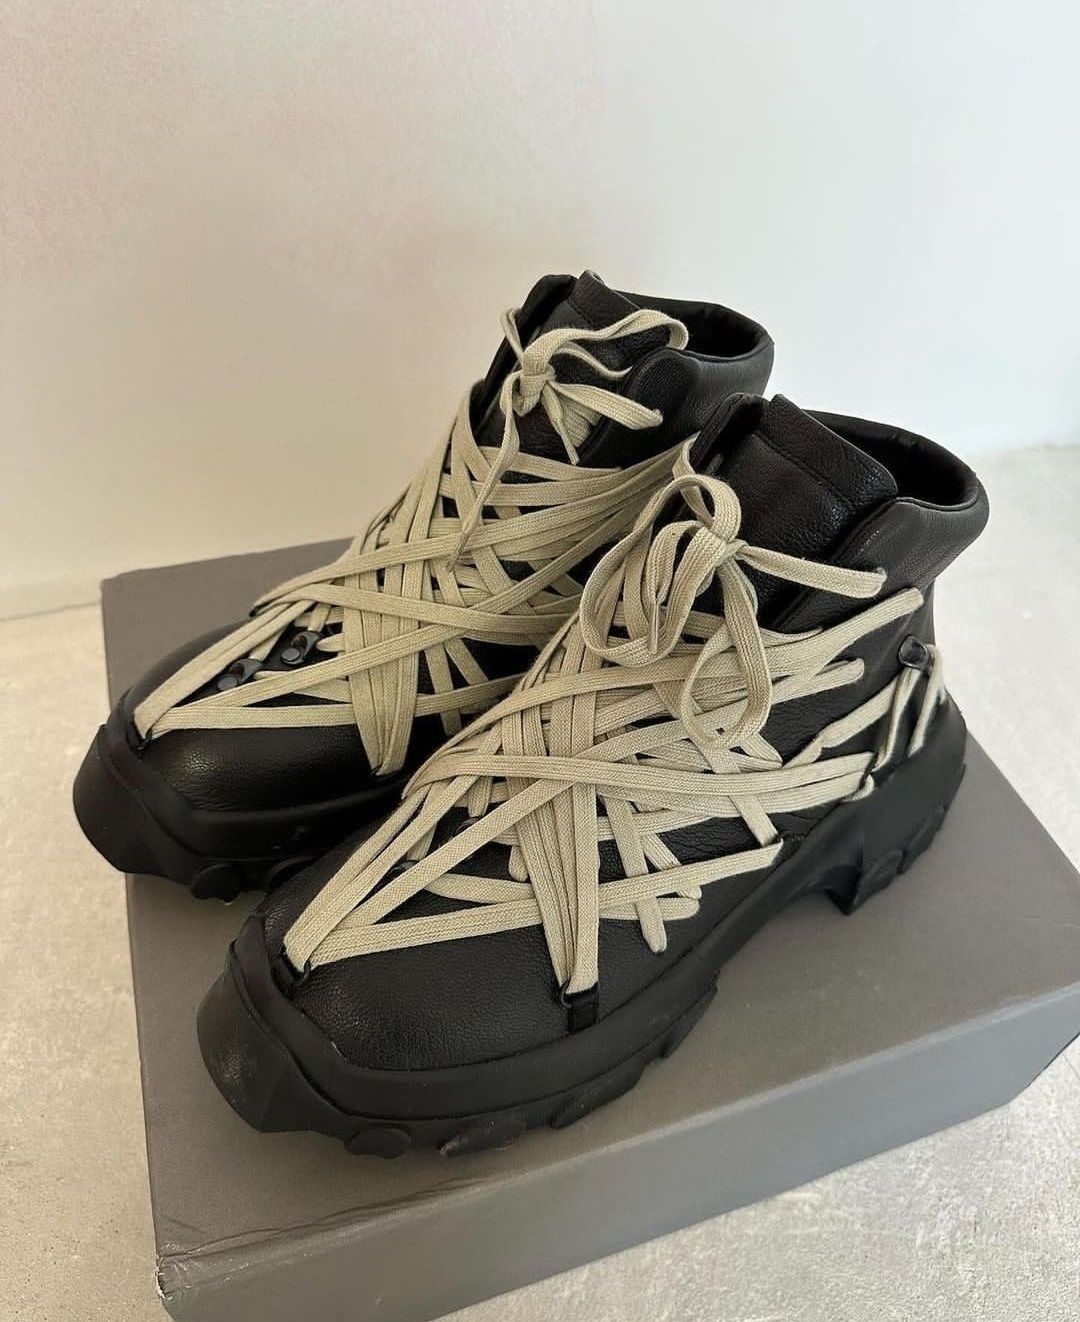 Rick Owens tractor boots